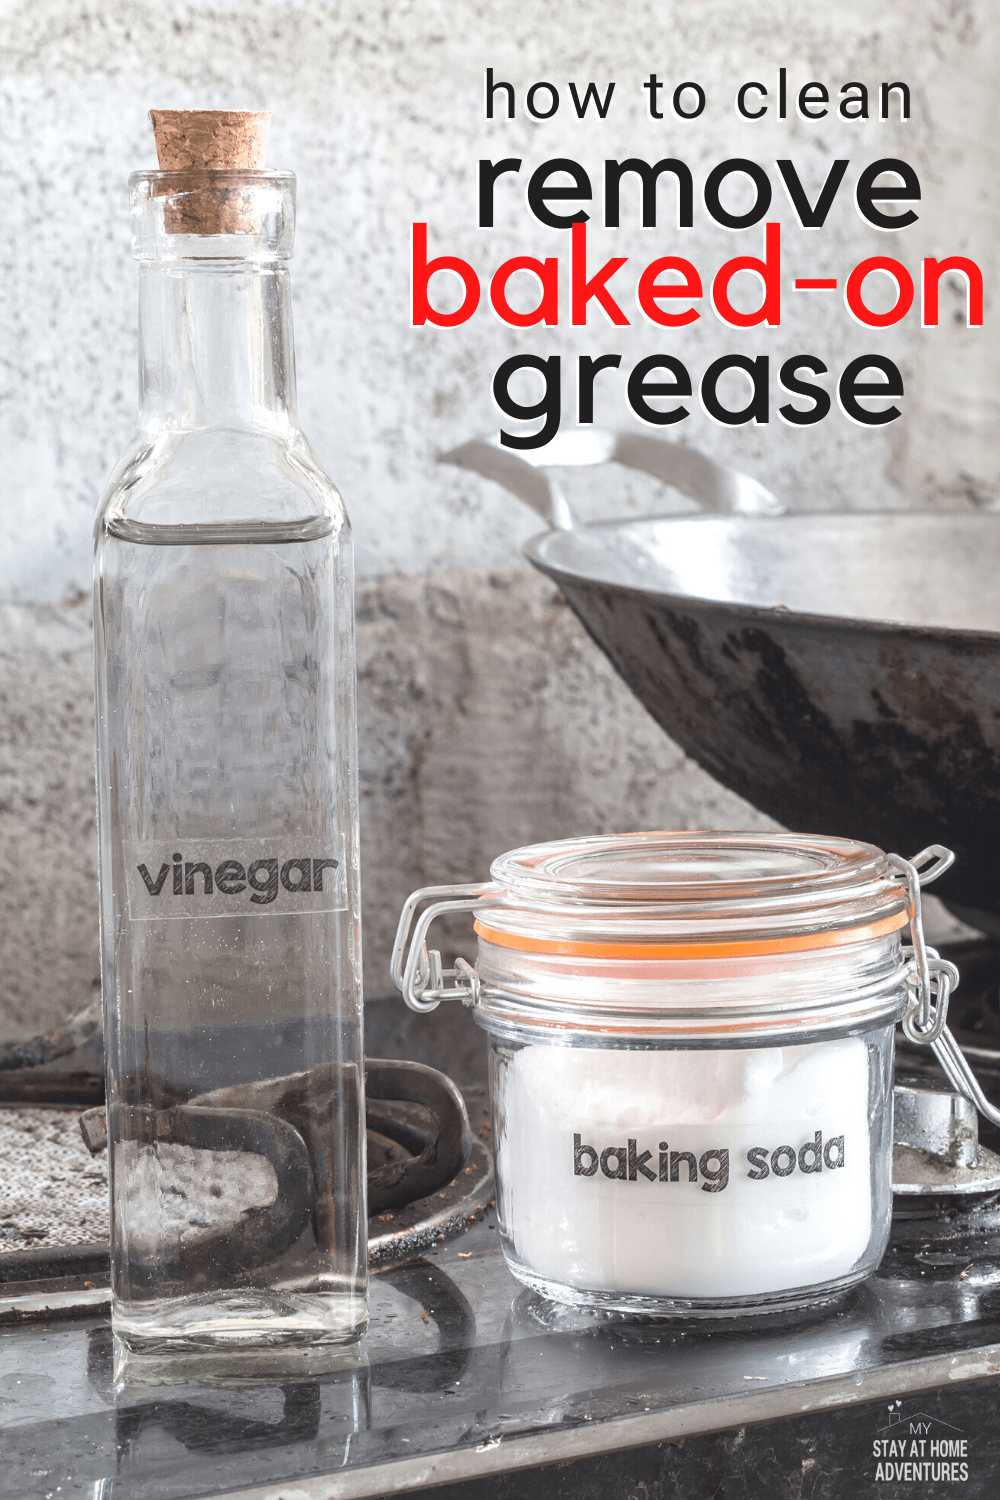 Learn two effective ways to clean baked-on grease from your stove that are fast and effective and will keep your stove looking clean. #cleanstove #cleaningtips #howto via @mystayathome